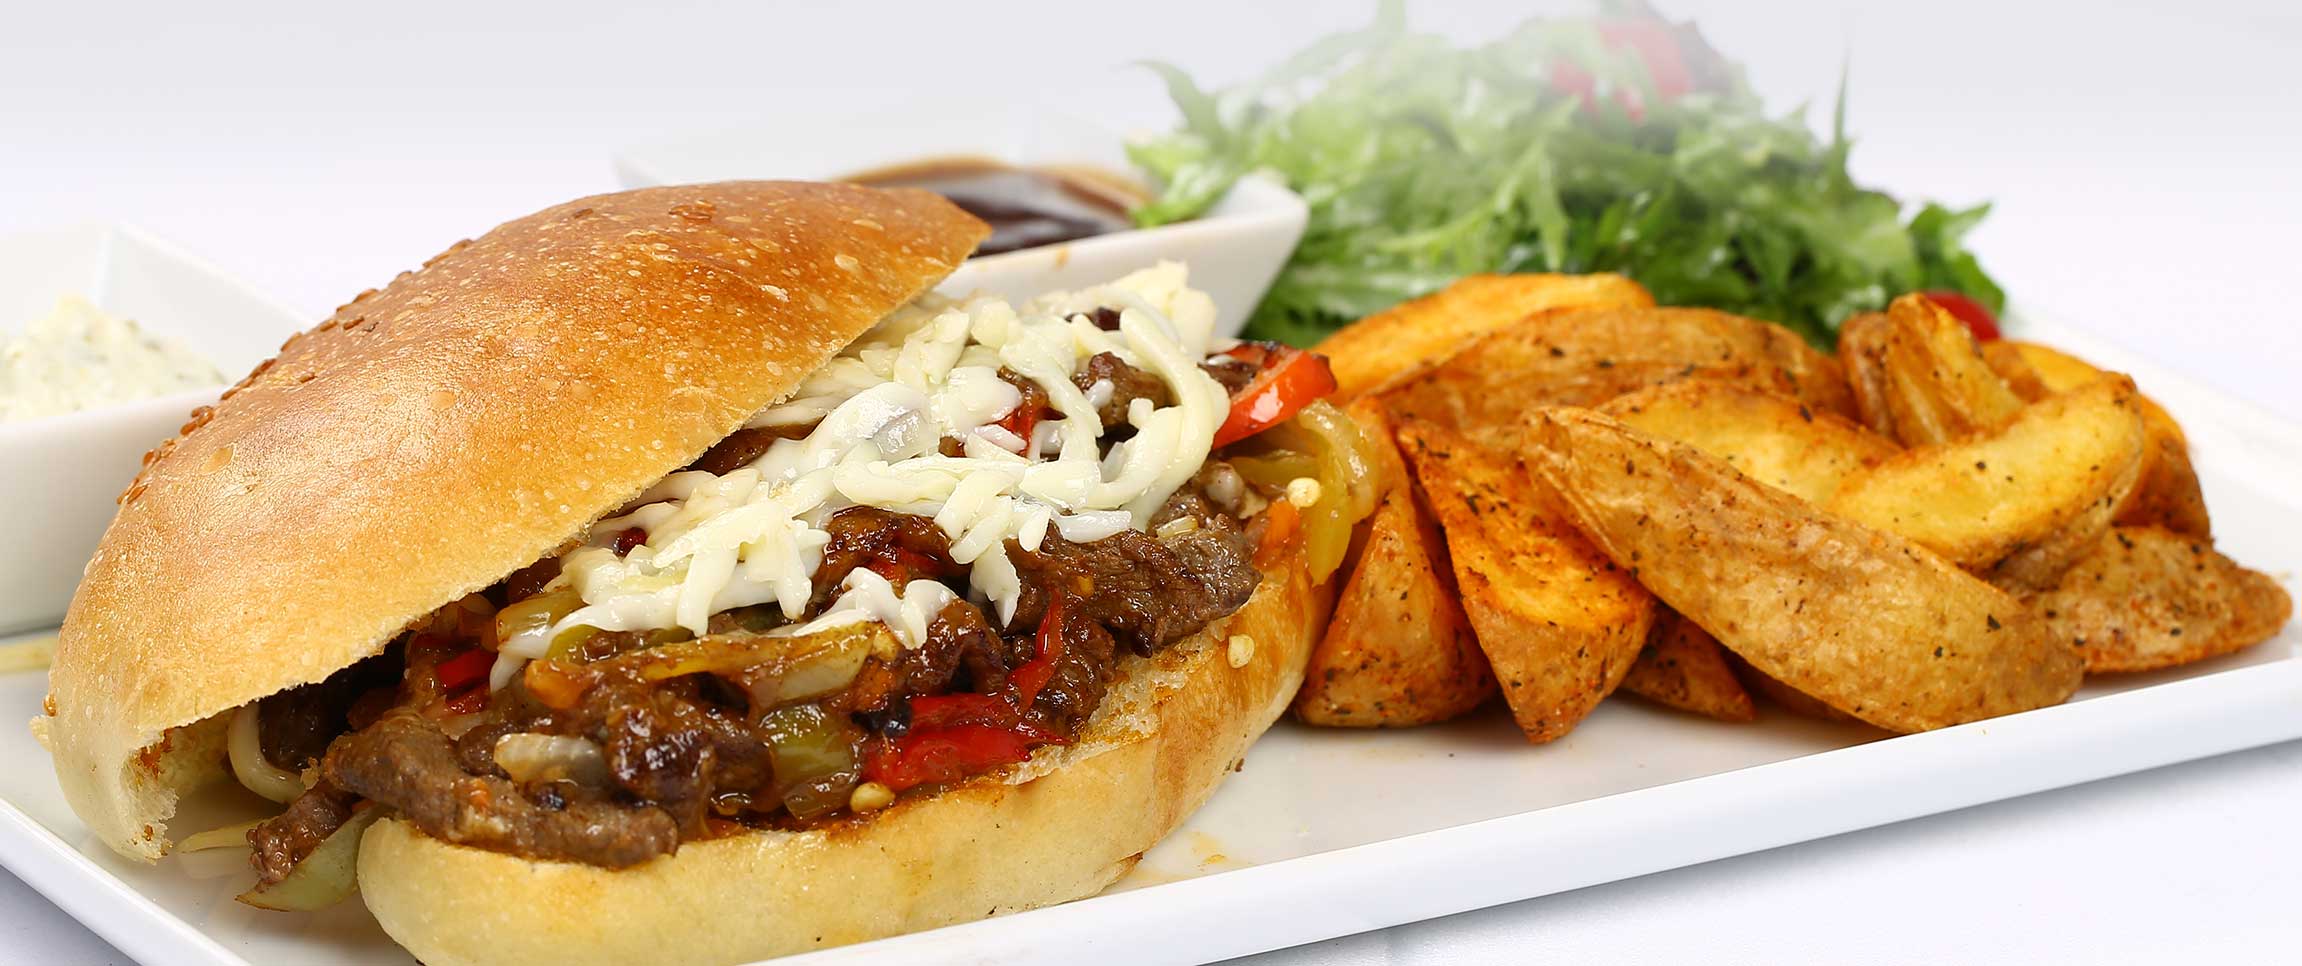 Philly Cheese Steak Burger with French Fries